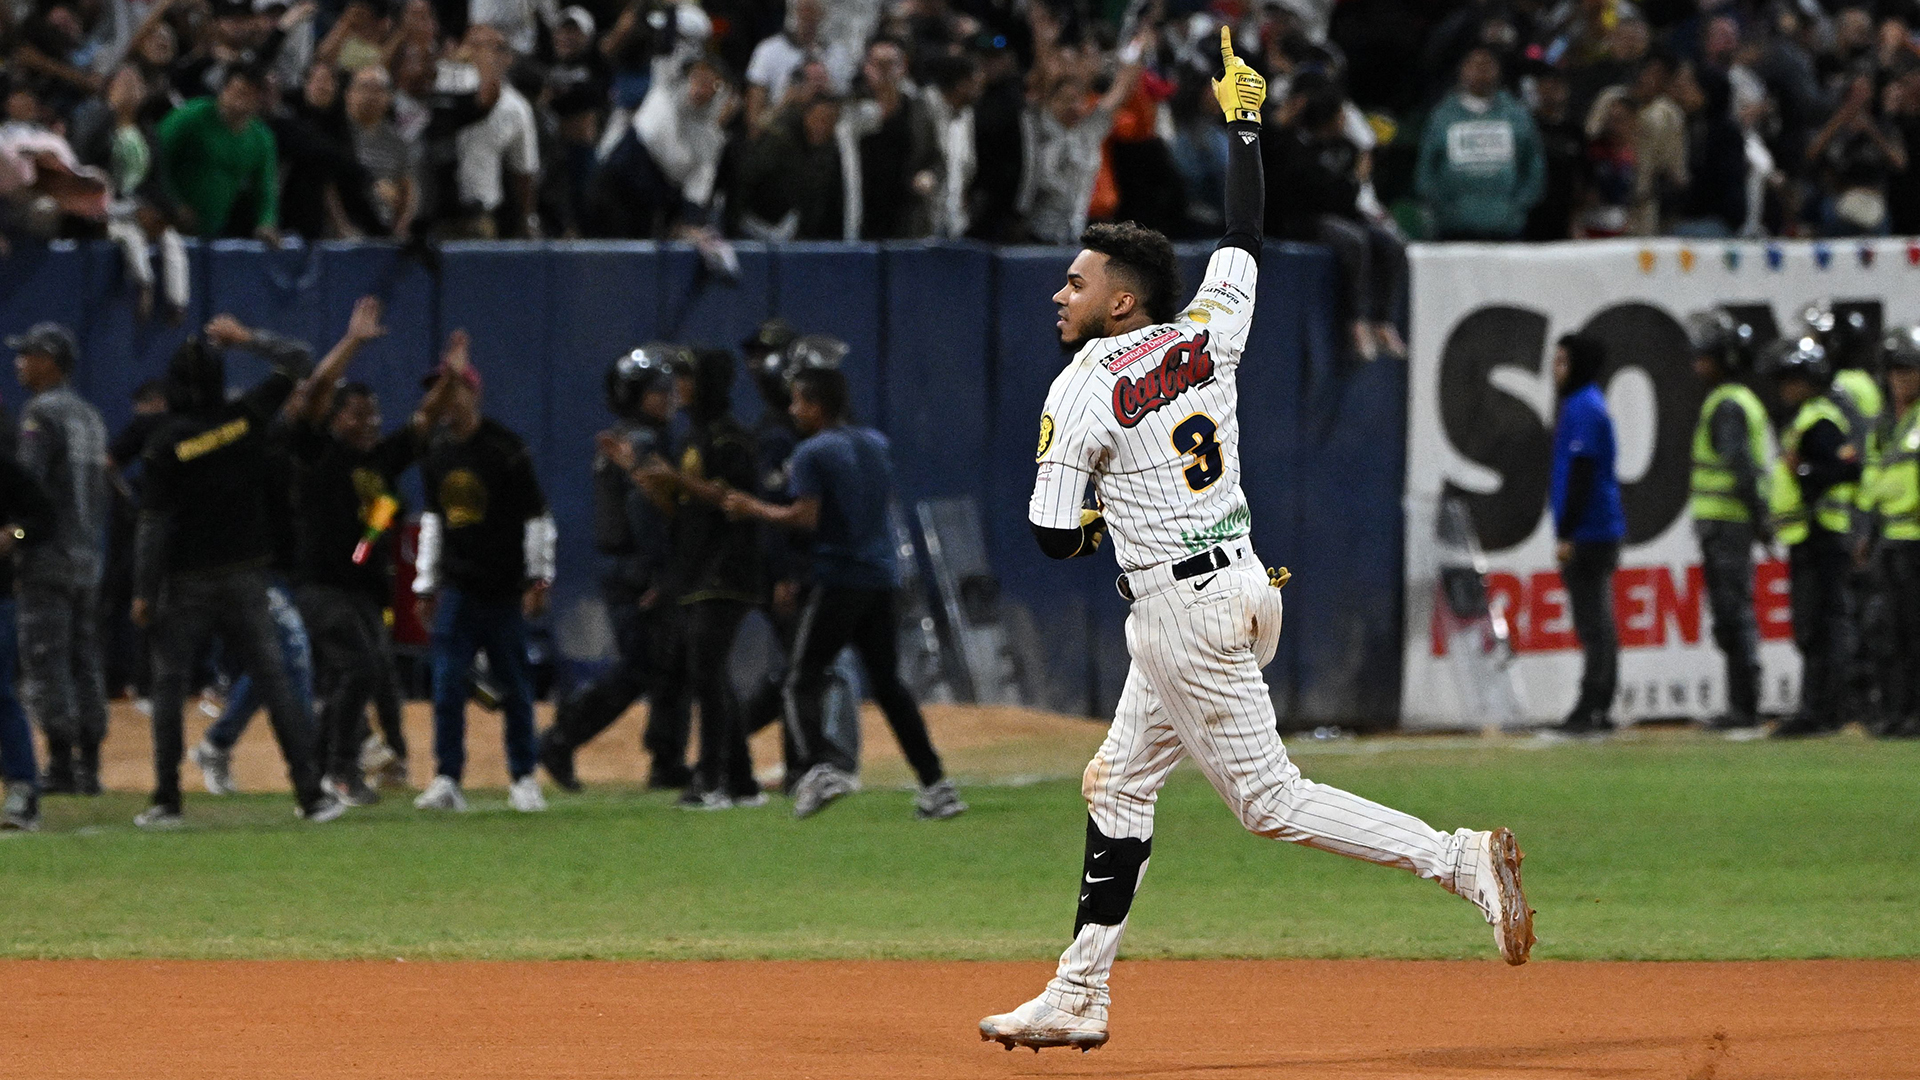 Harold Castro of Leones del Caracas reacts after hitting a home run against Tiburones de la Guaira during the Game Six of the Venezuelan Baseball League Championship Series at the Universitario stadium in Caracas, on January 30, 2023.